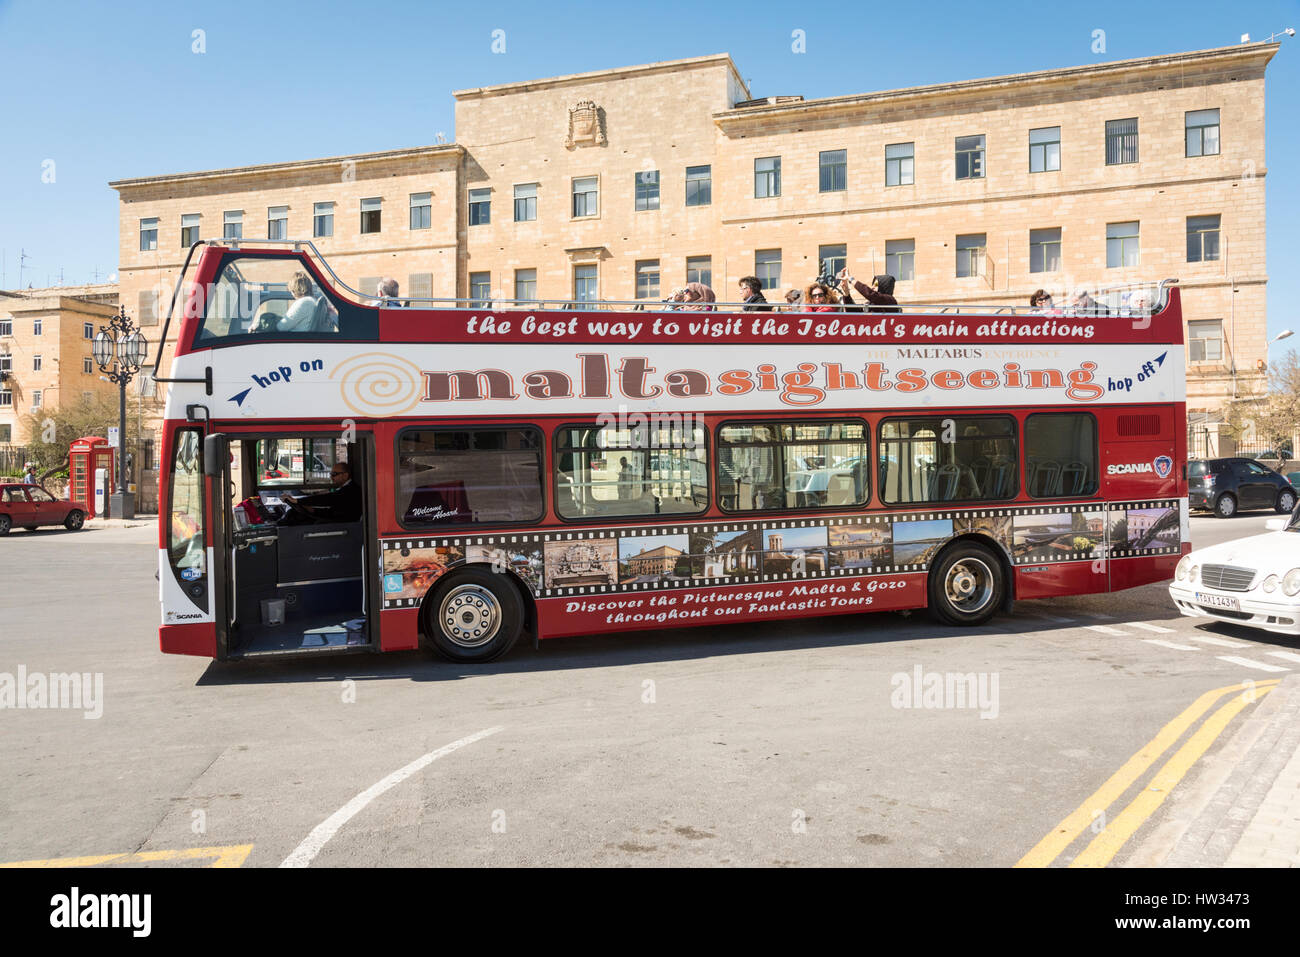 An open top tourist bus in Valetta Malta on a sightseeing tour or trip Stock Photo